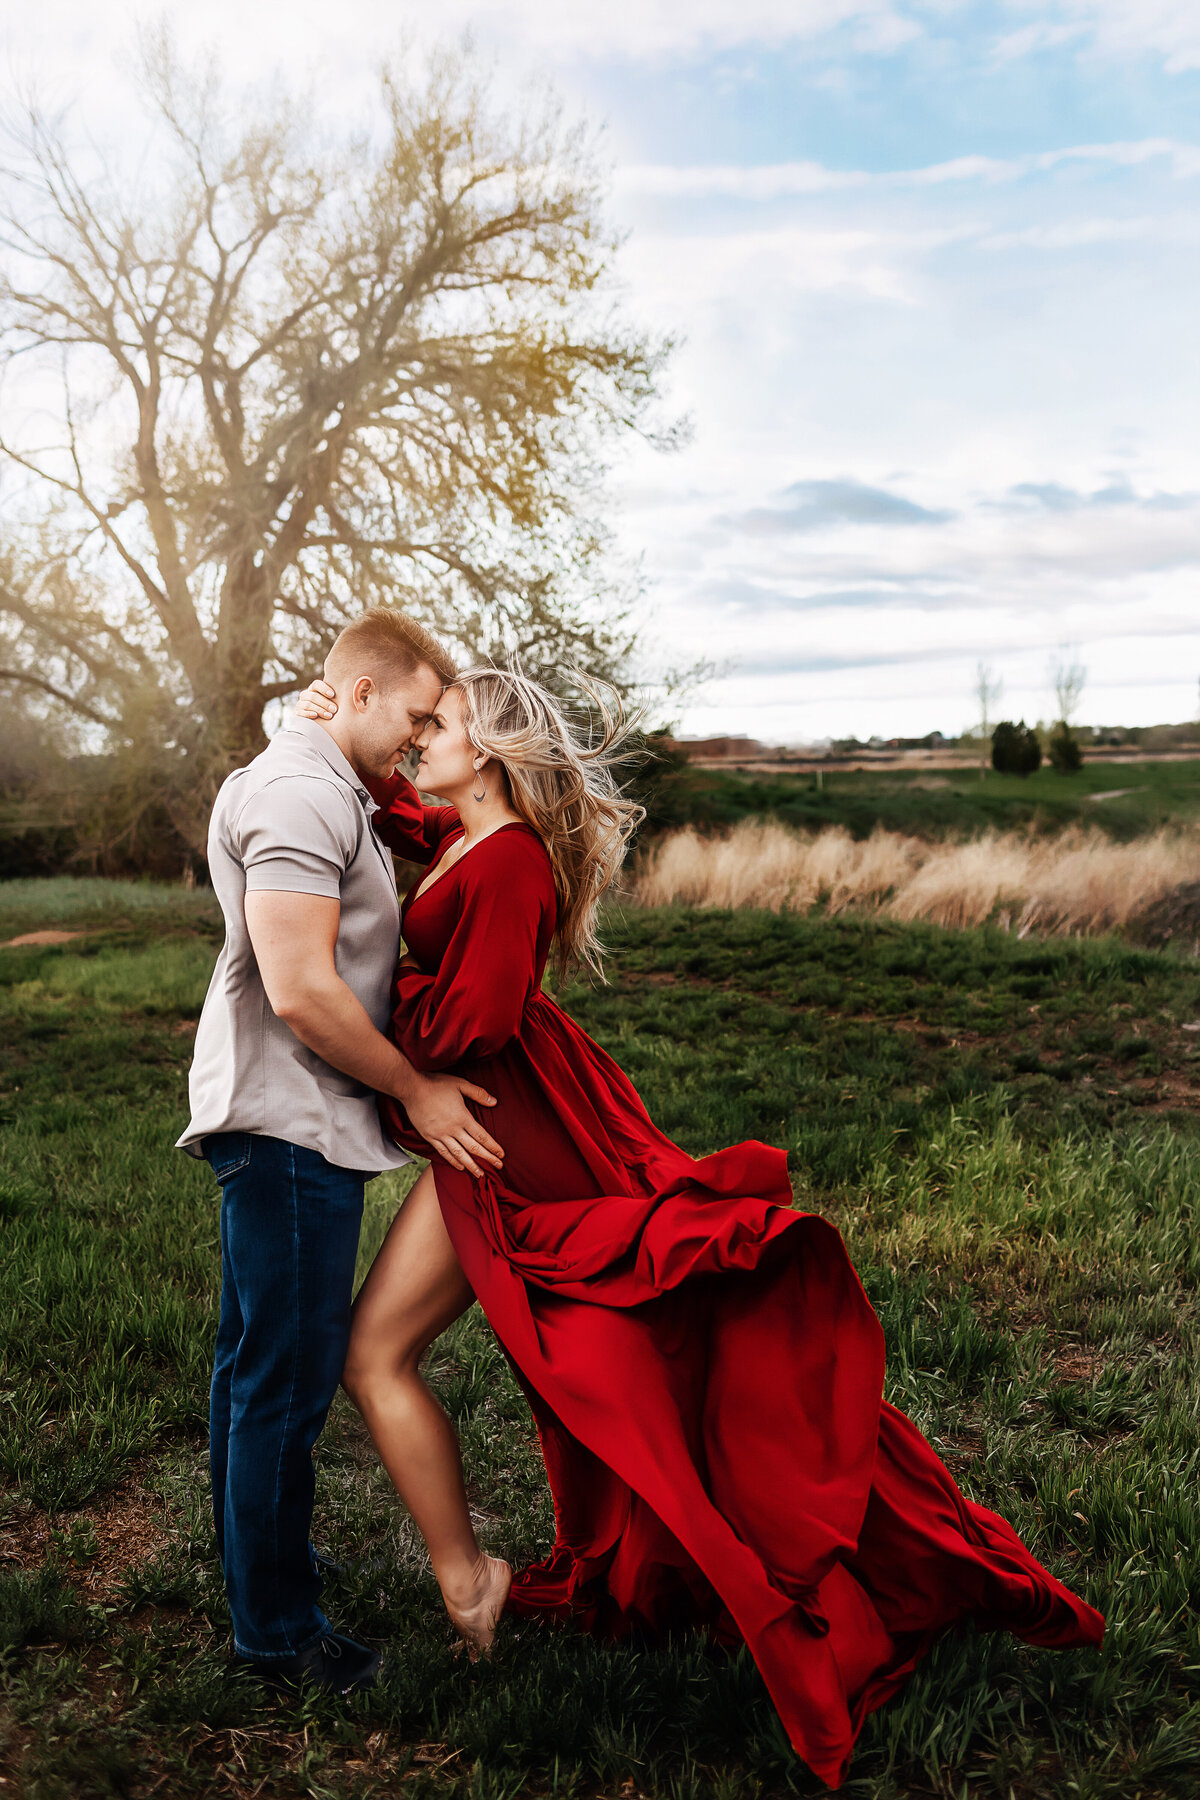 thornton couple maternity photos outside in the winter wind